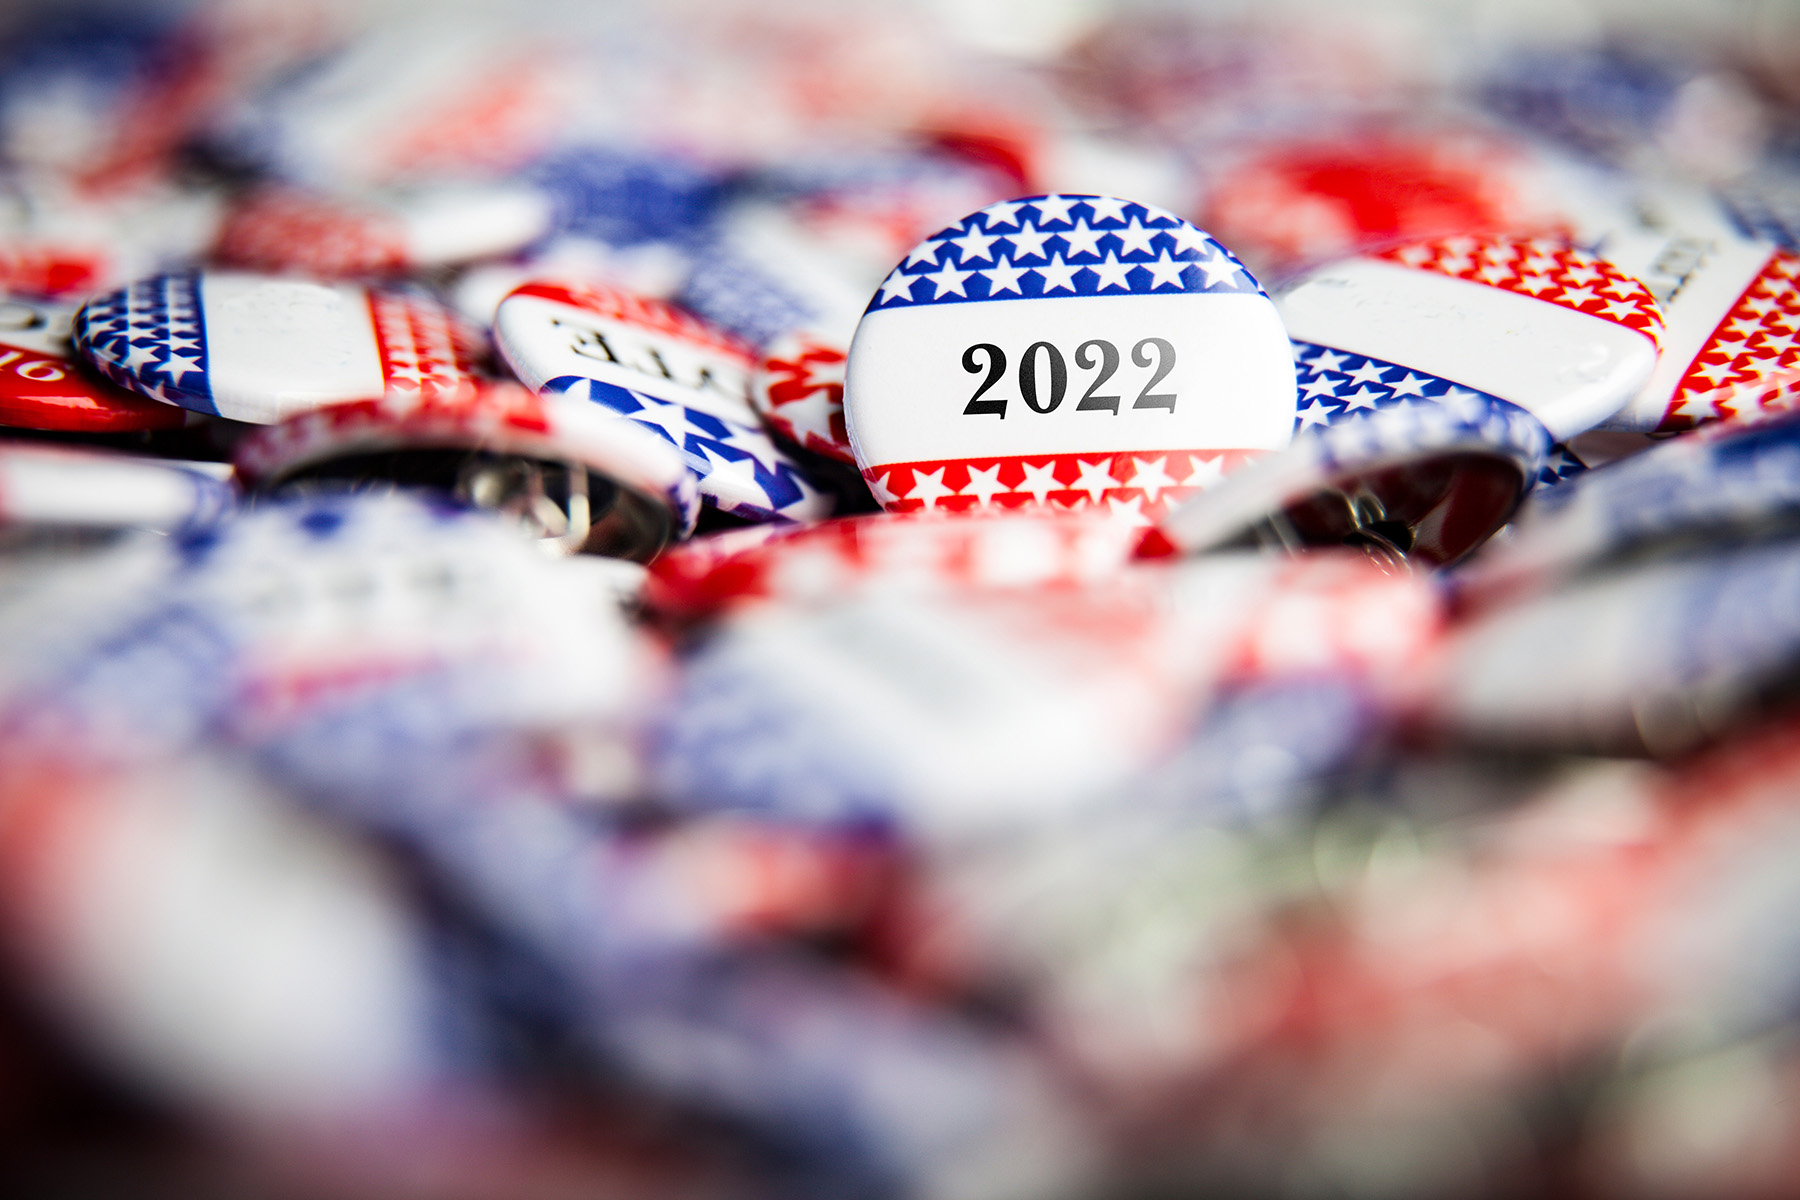 Several new election reform bills introduced ahead of 2022 Midterm Elections